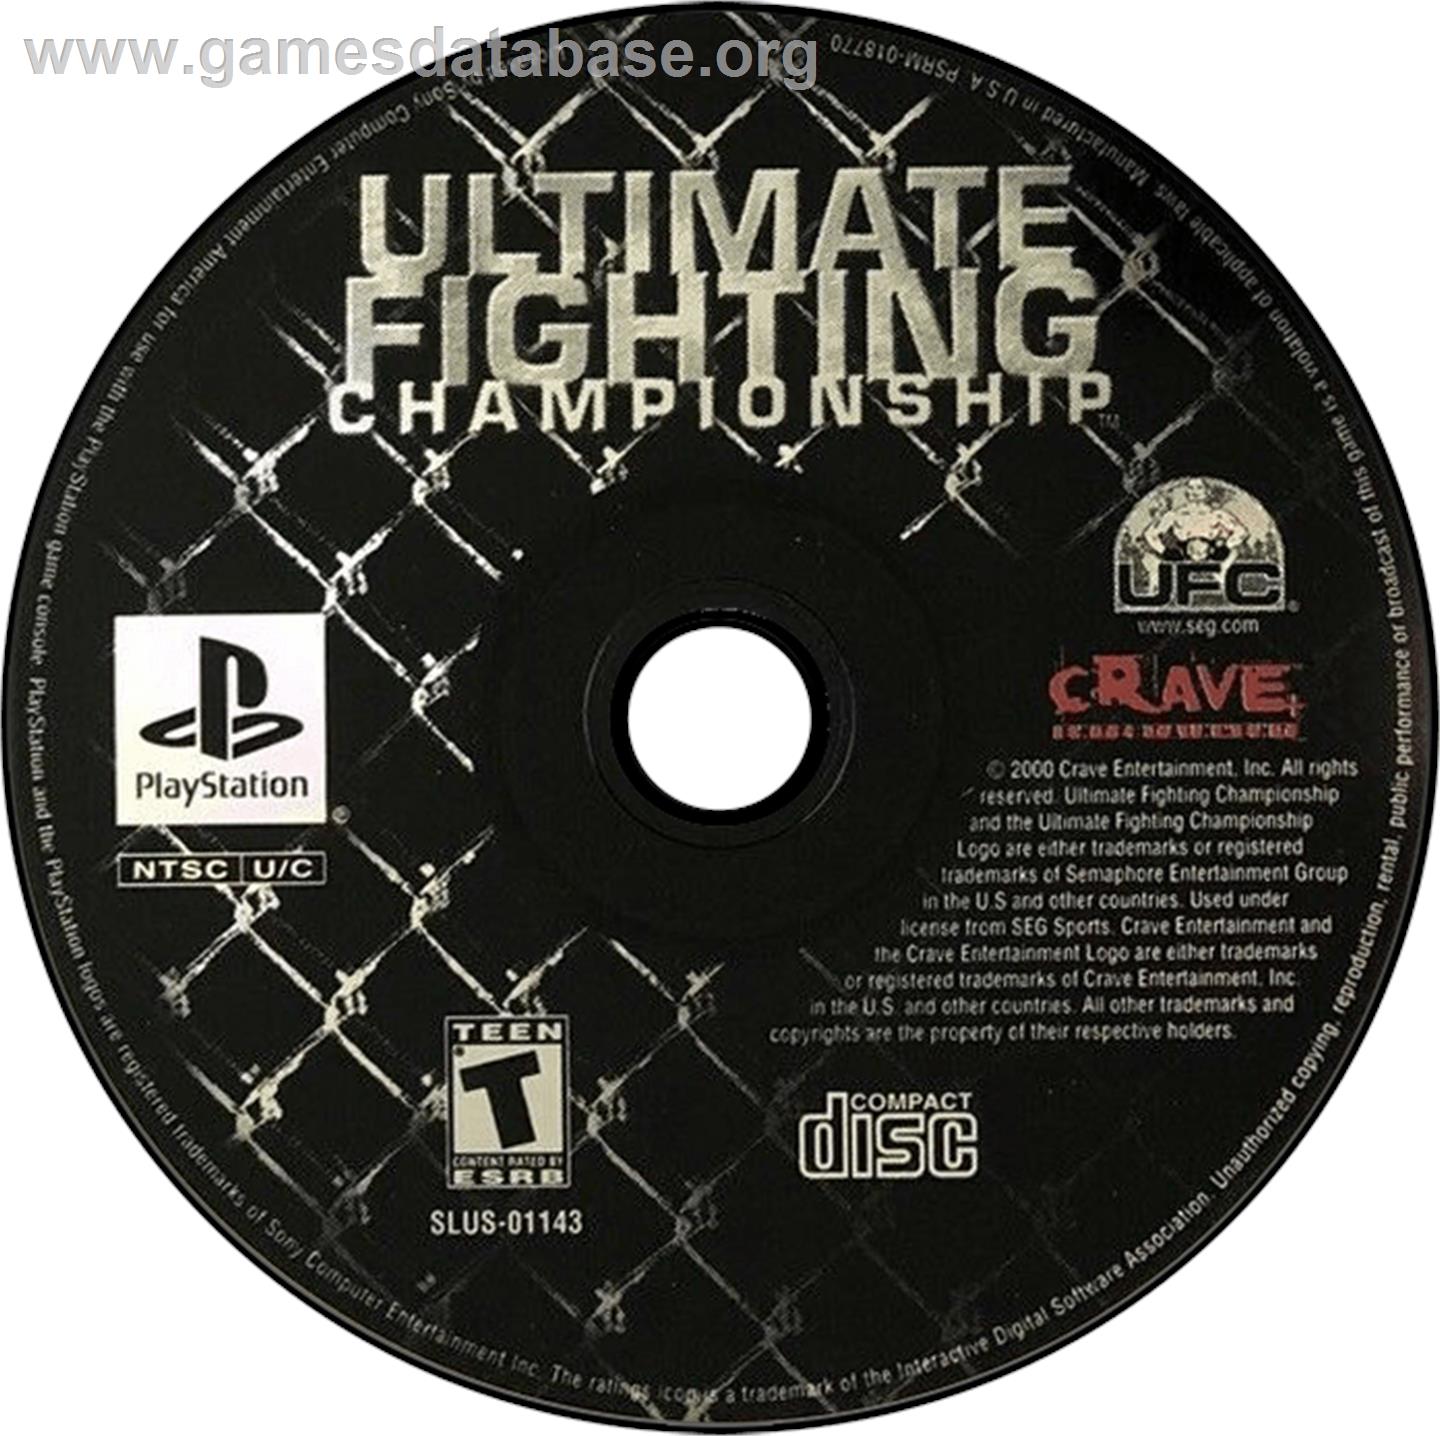 Ultimate Fighting Championship - Sony Playstation - Artwork - Disc